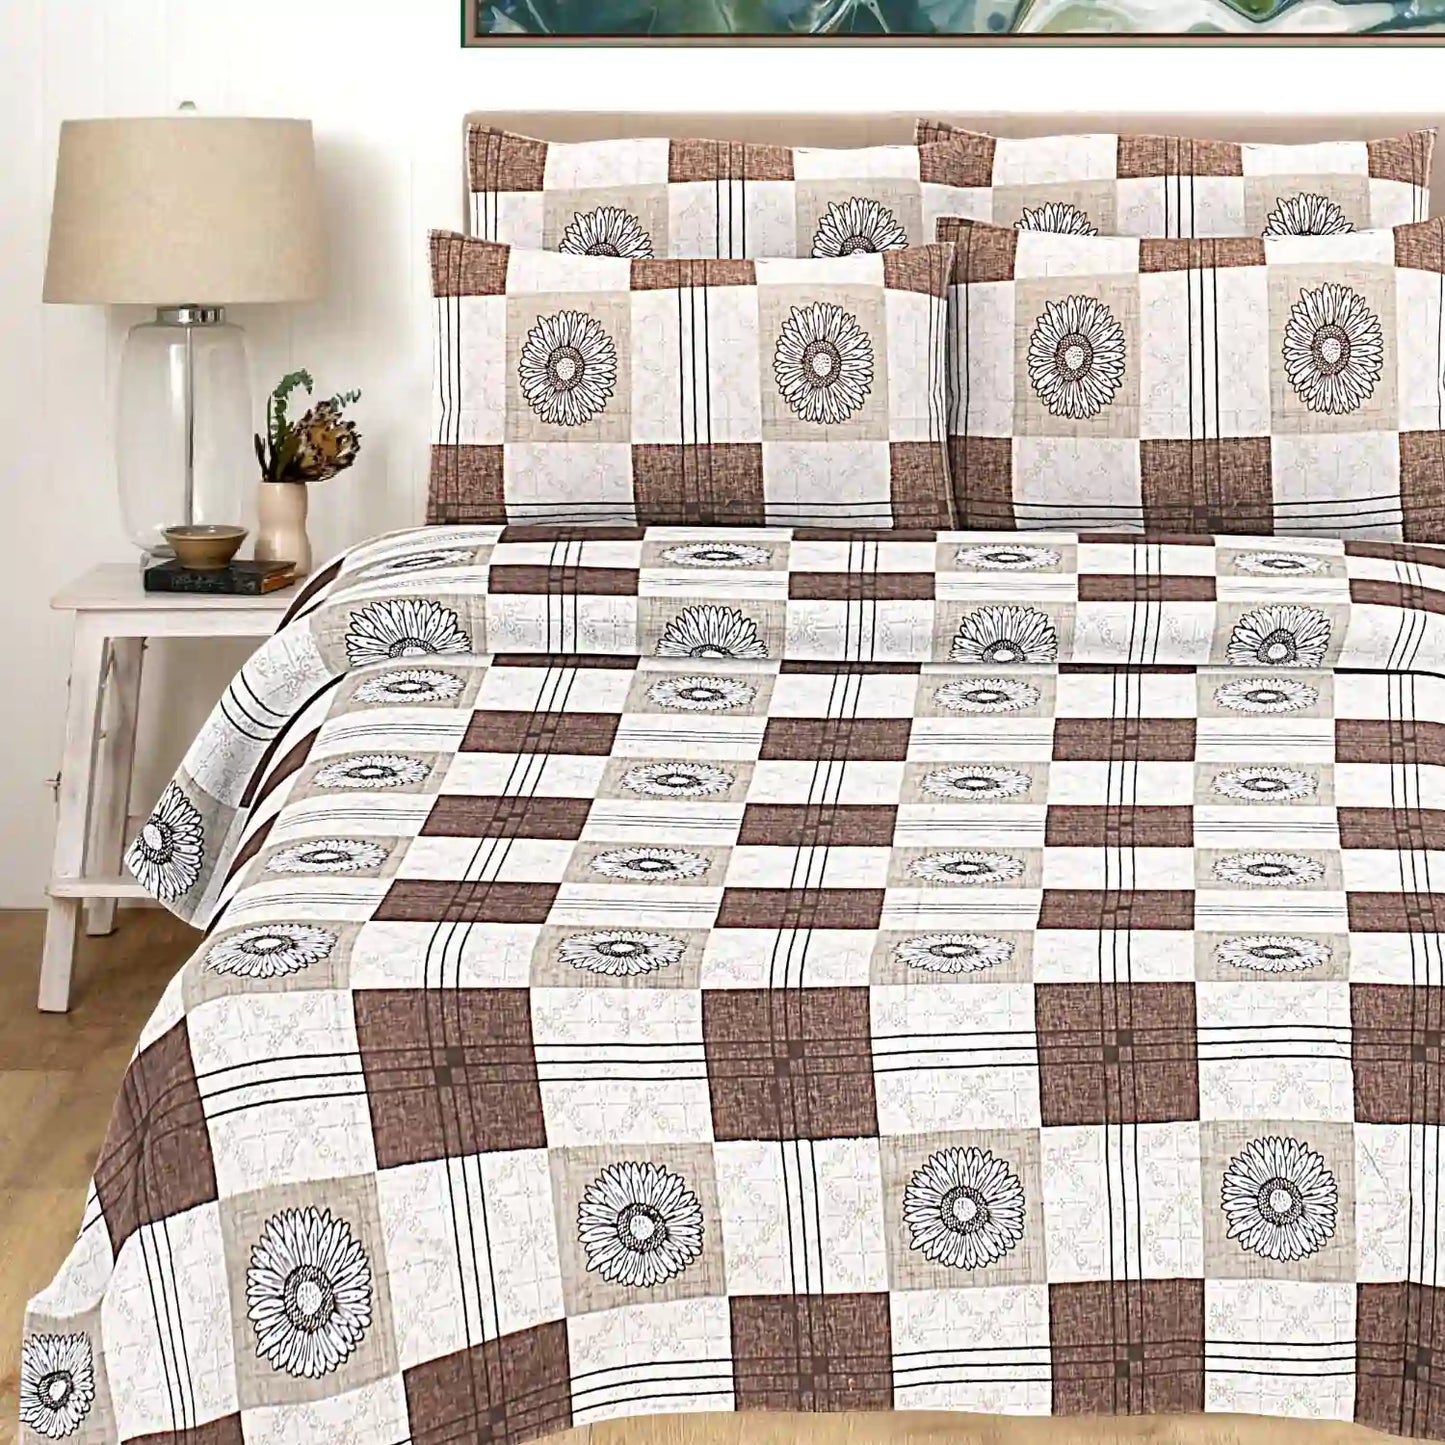 Checkered Double Bed Bedsheet